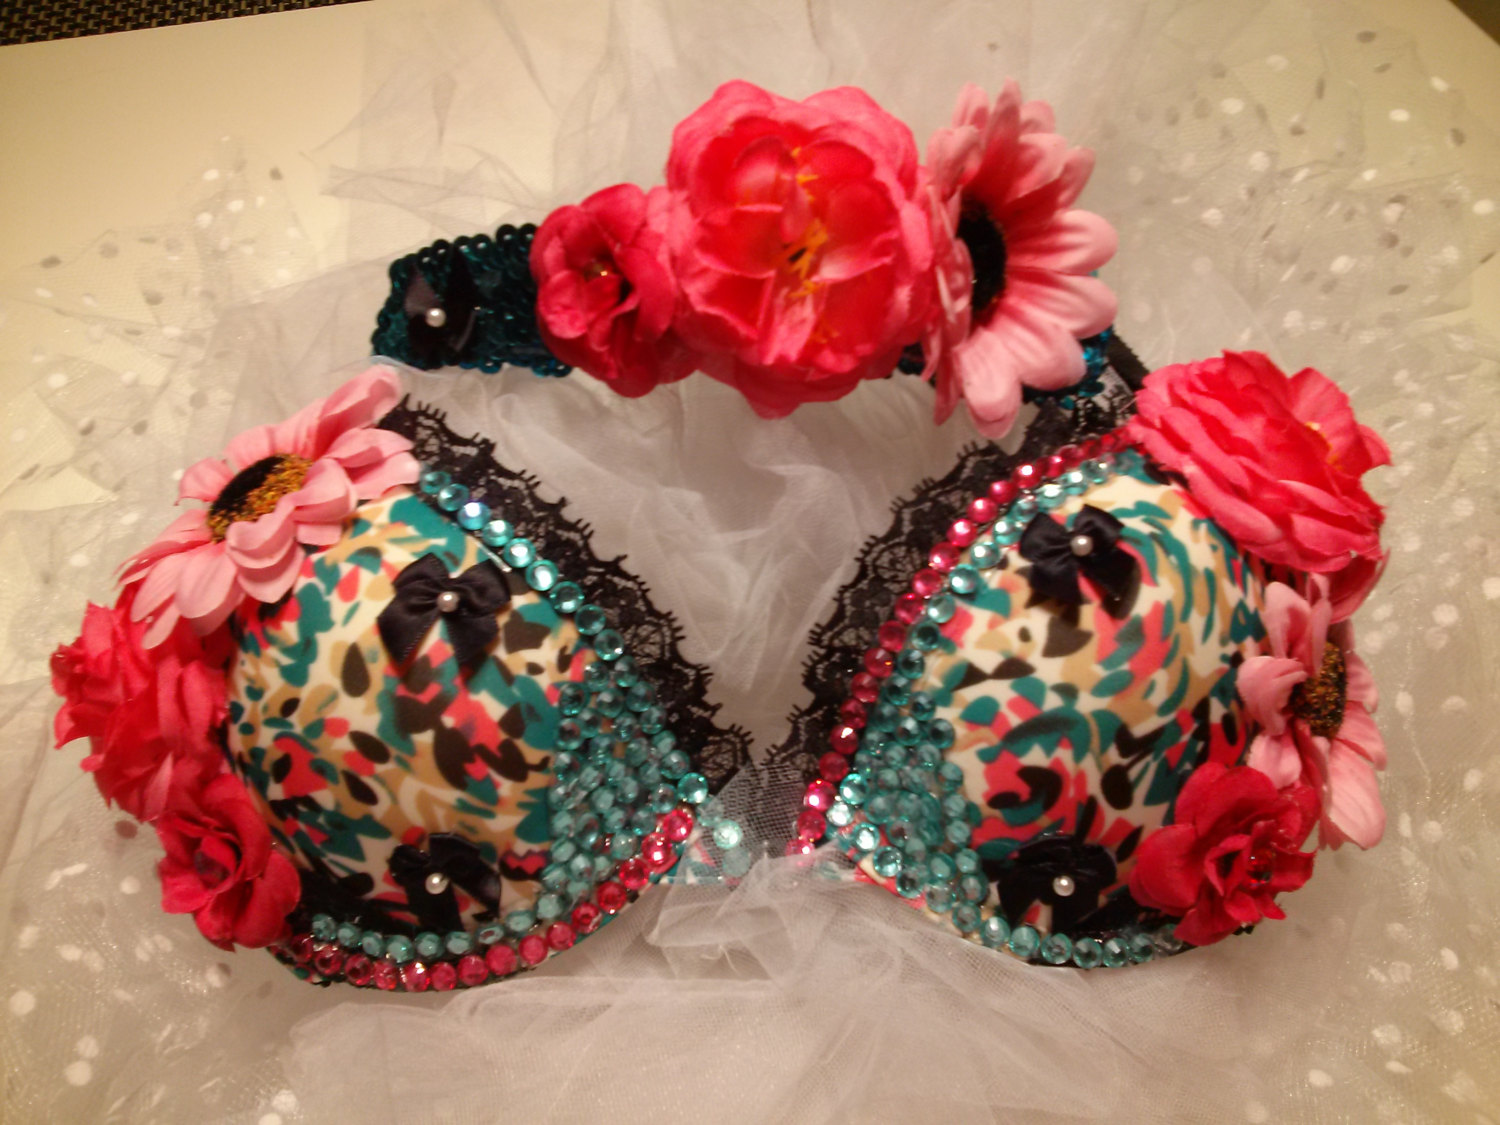 SOLD - Aqua and pink flower 32B Rave Bra with matching flower headband